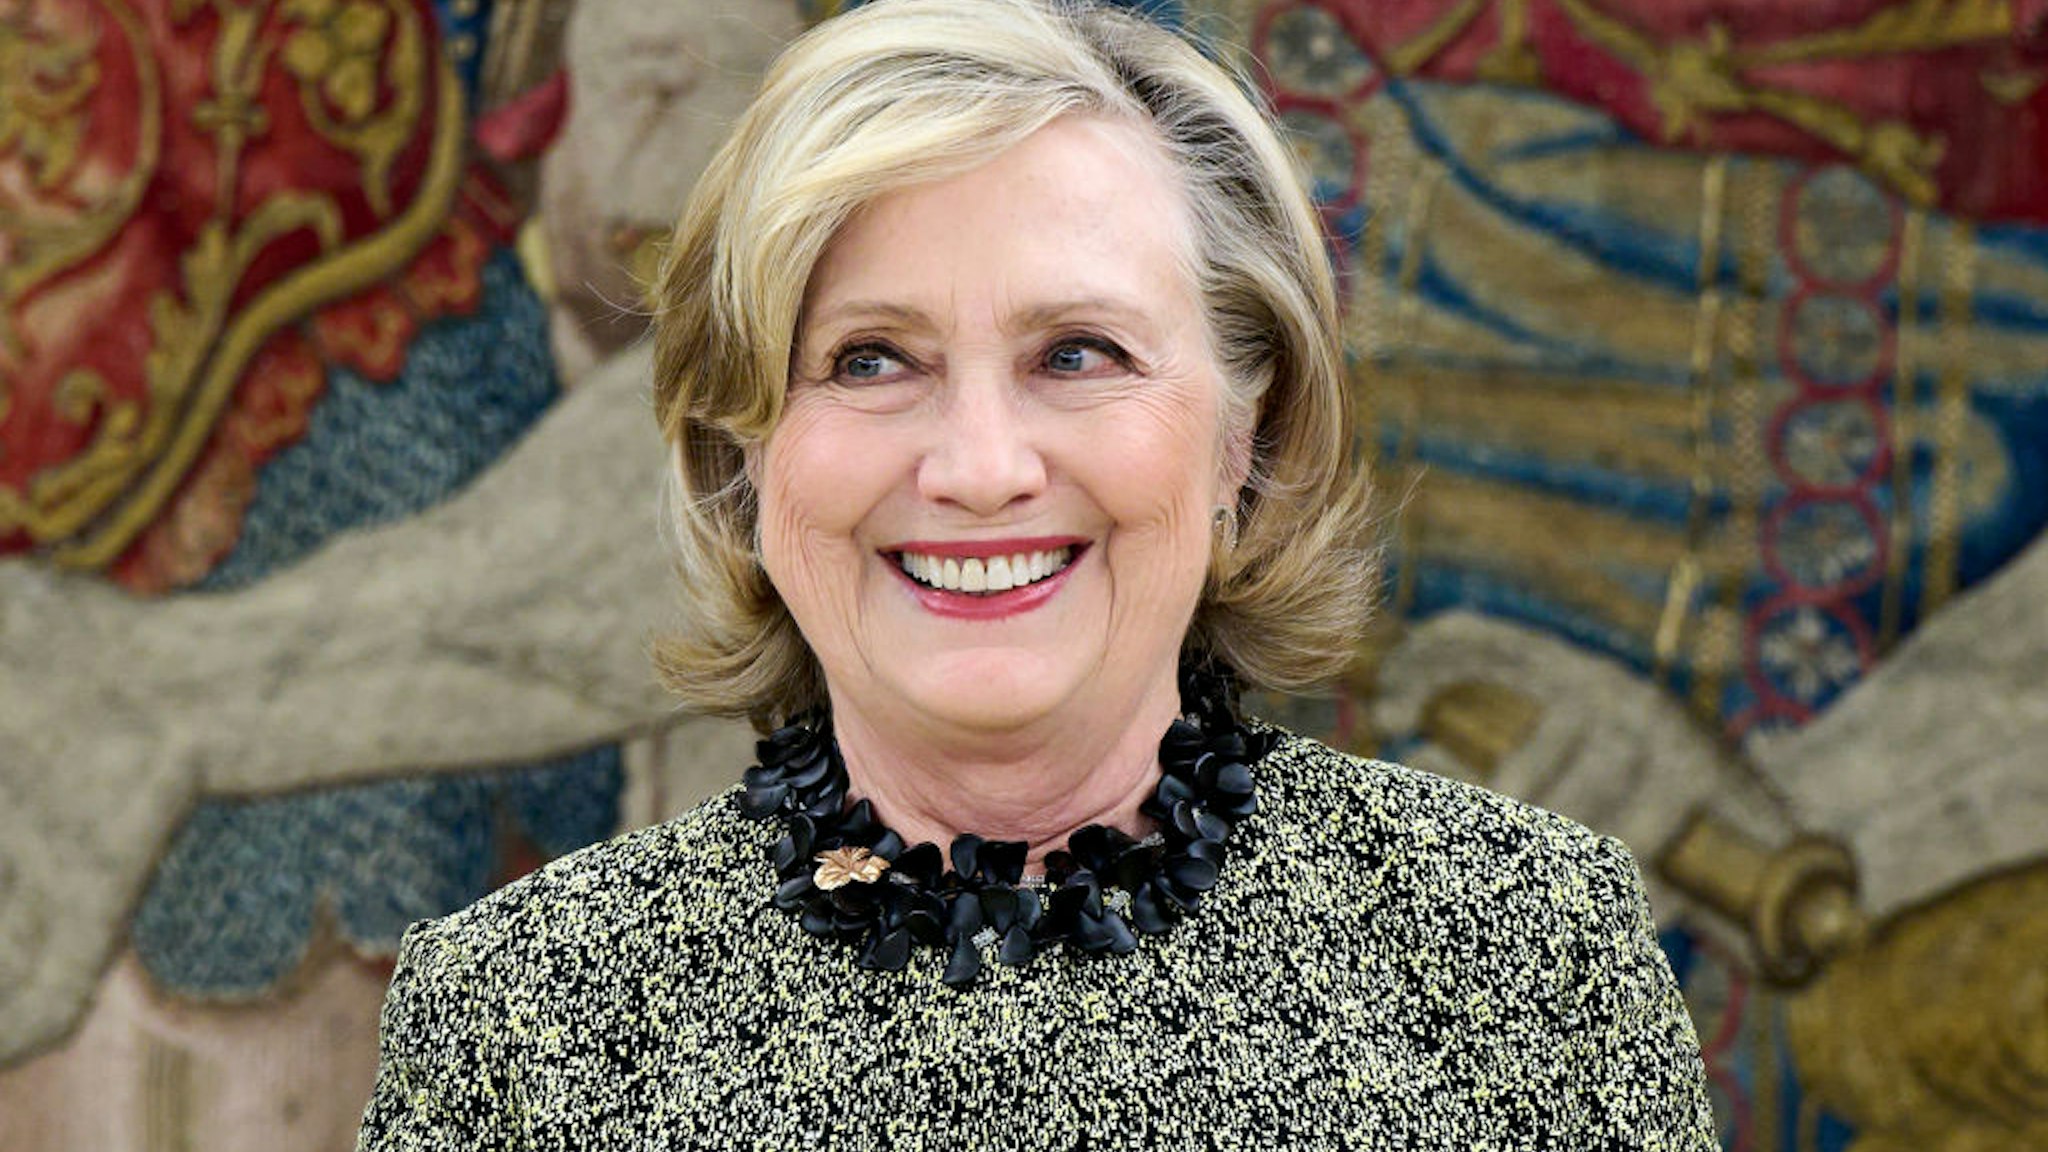 MADRID, SPAIN - MAY 31: Former US Secretary of State Hillary Clinton waits for Kinf Felipe VI of Spain at the Zarzuela Palace on May 31, 2023 in Madrid, Spain. (Photo by Carlos Alvarez/Getty Images)